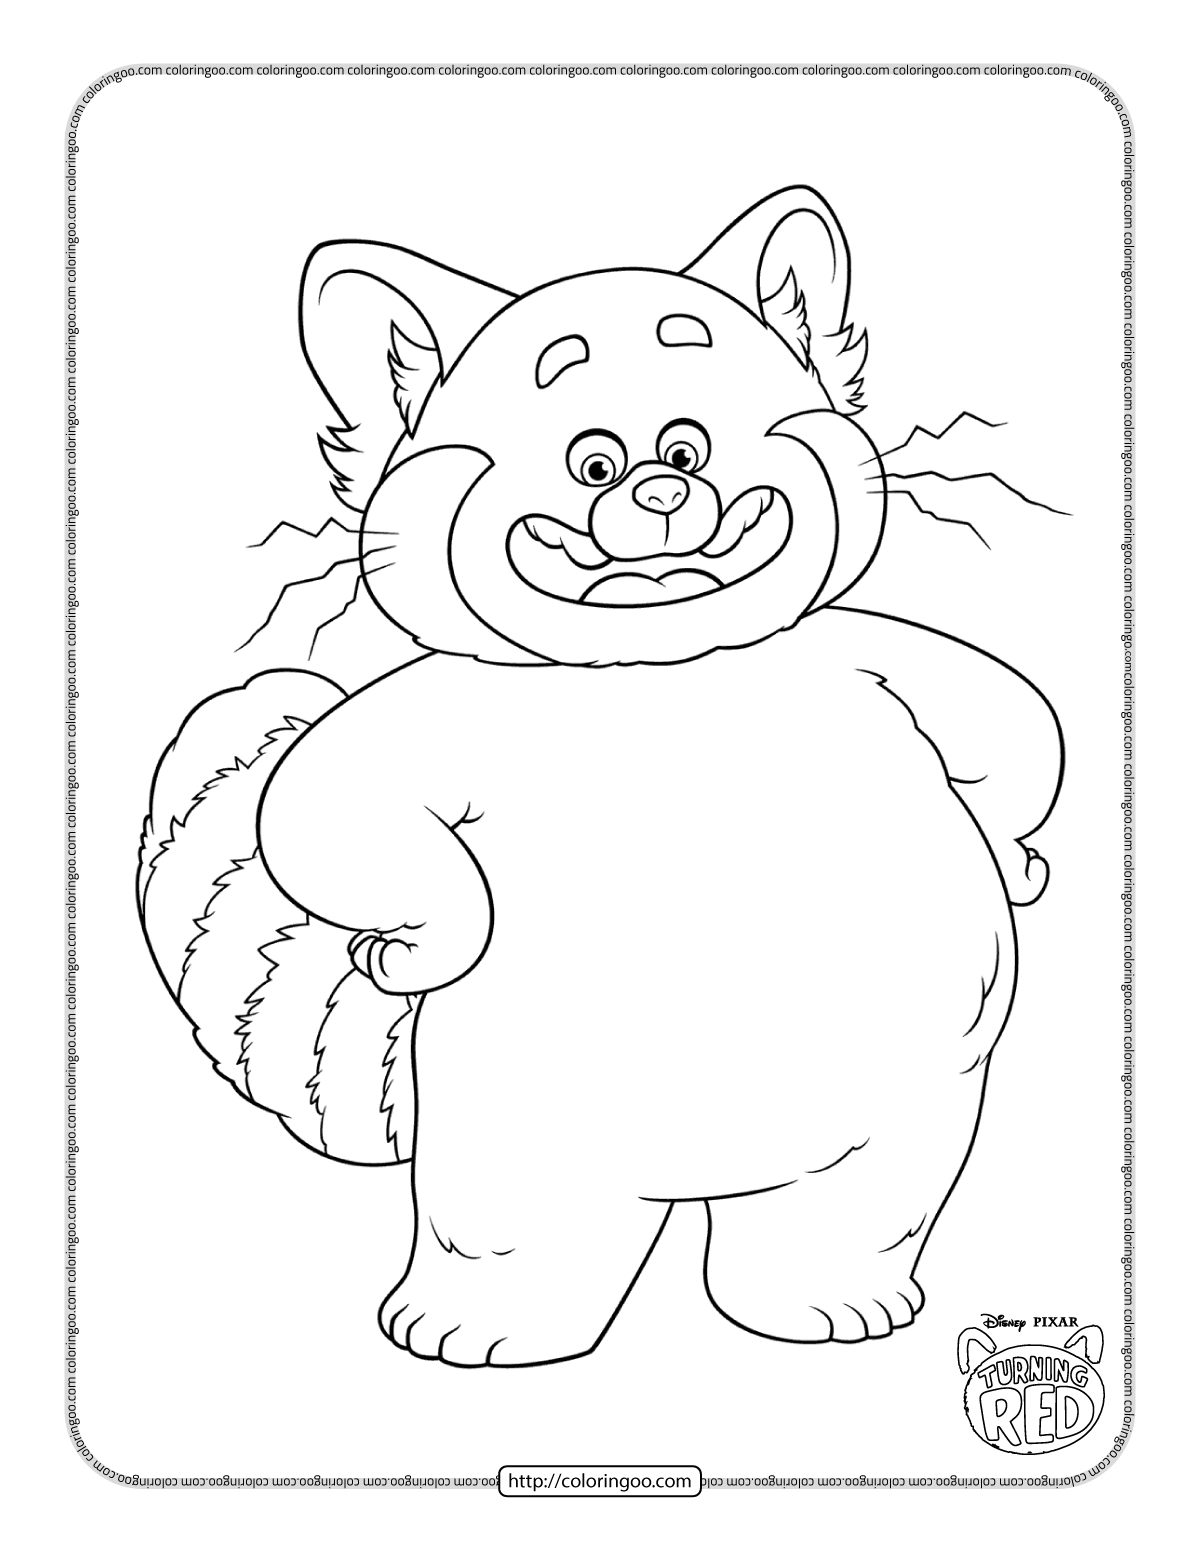 turning red panda form coloring pages